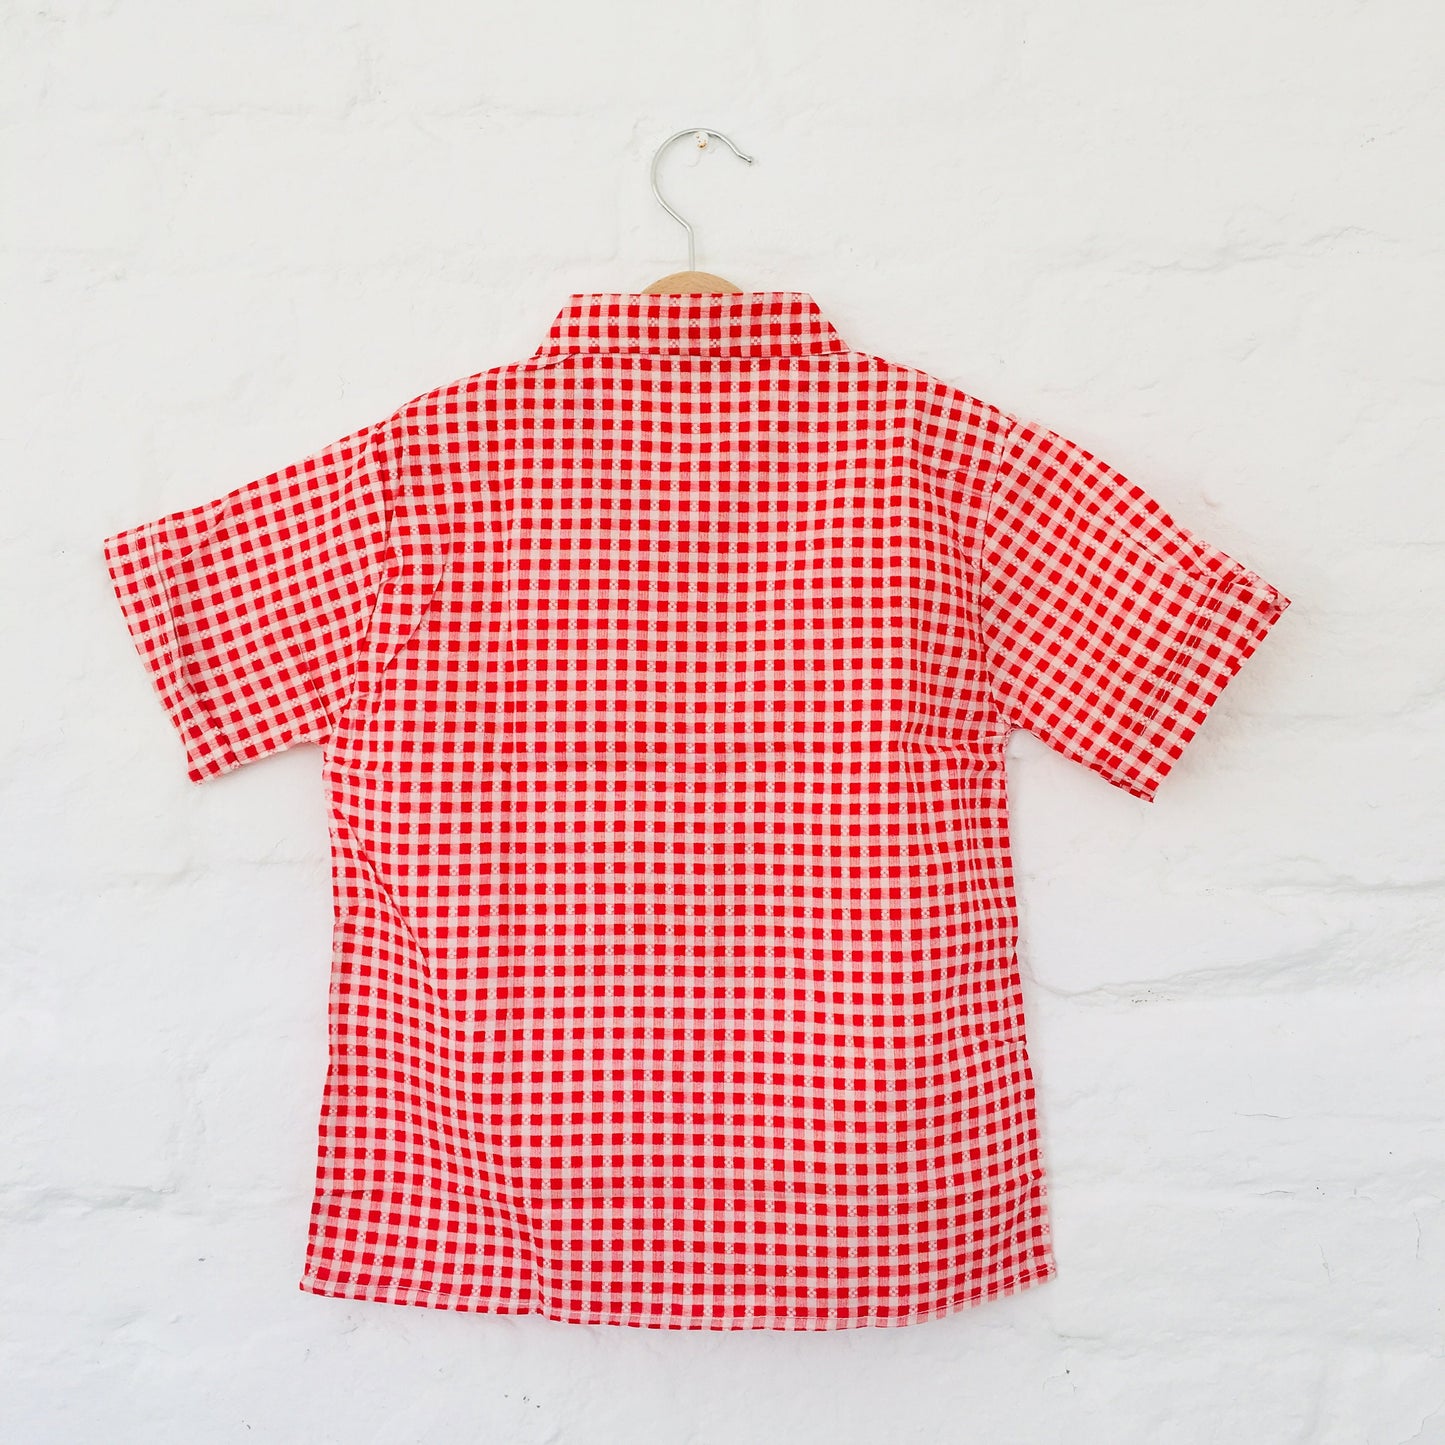 Vintage 60's Checked Red Shirt 8-10Y